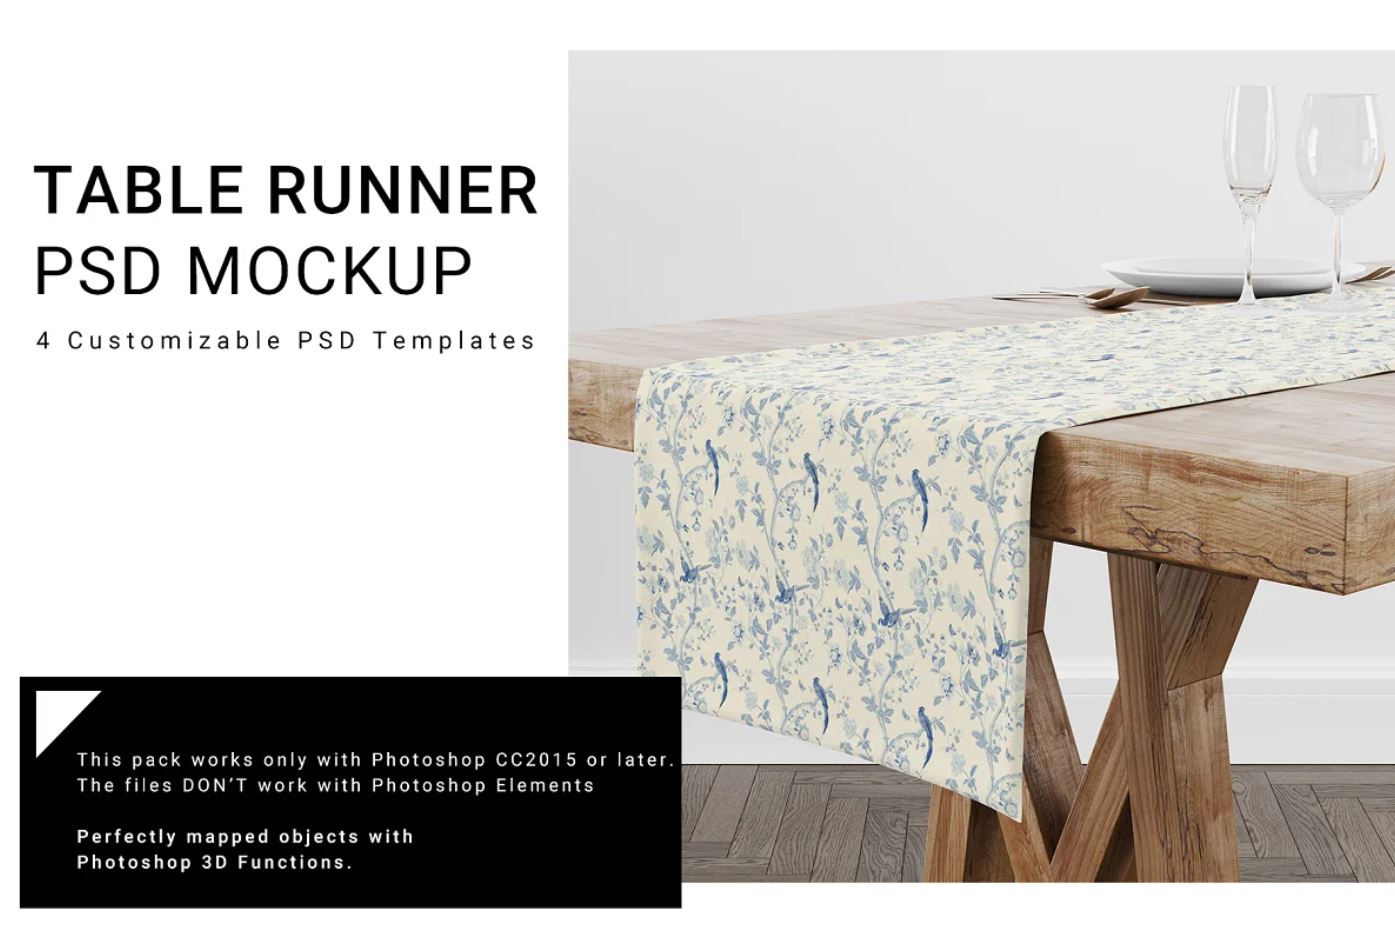 Tablecloth and Runner Design Mockup Download